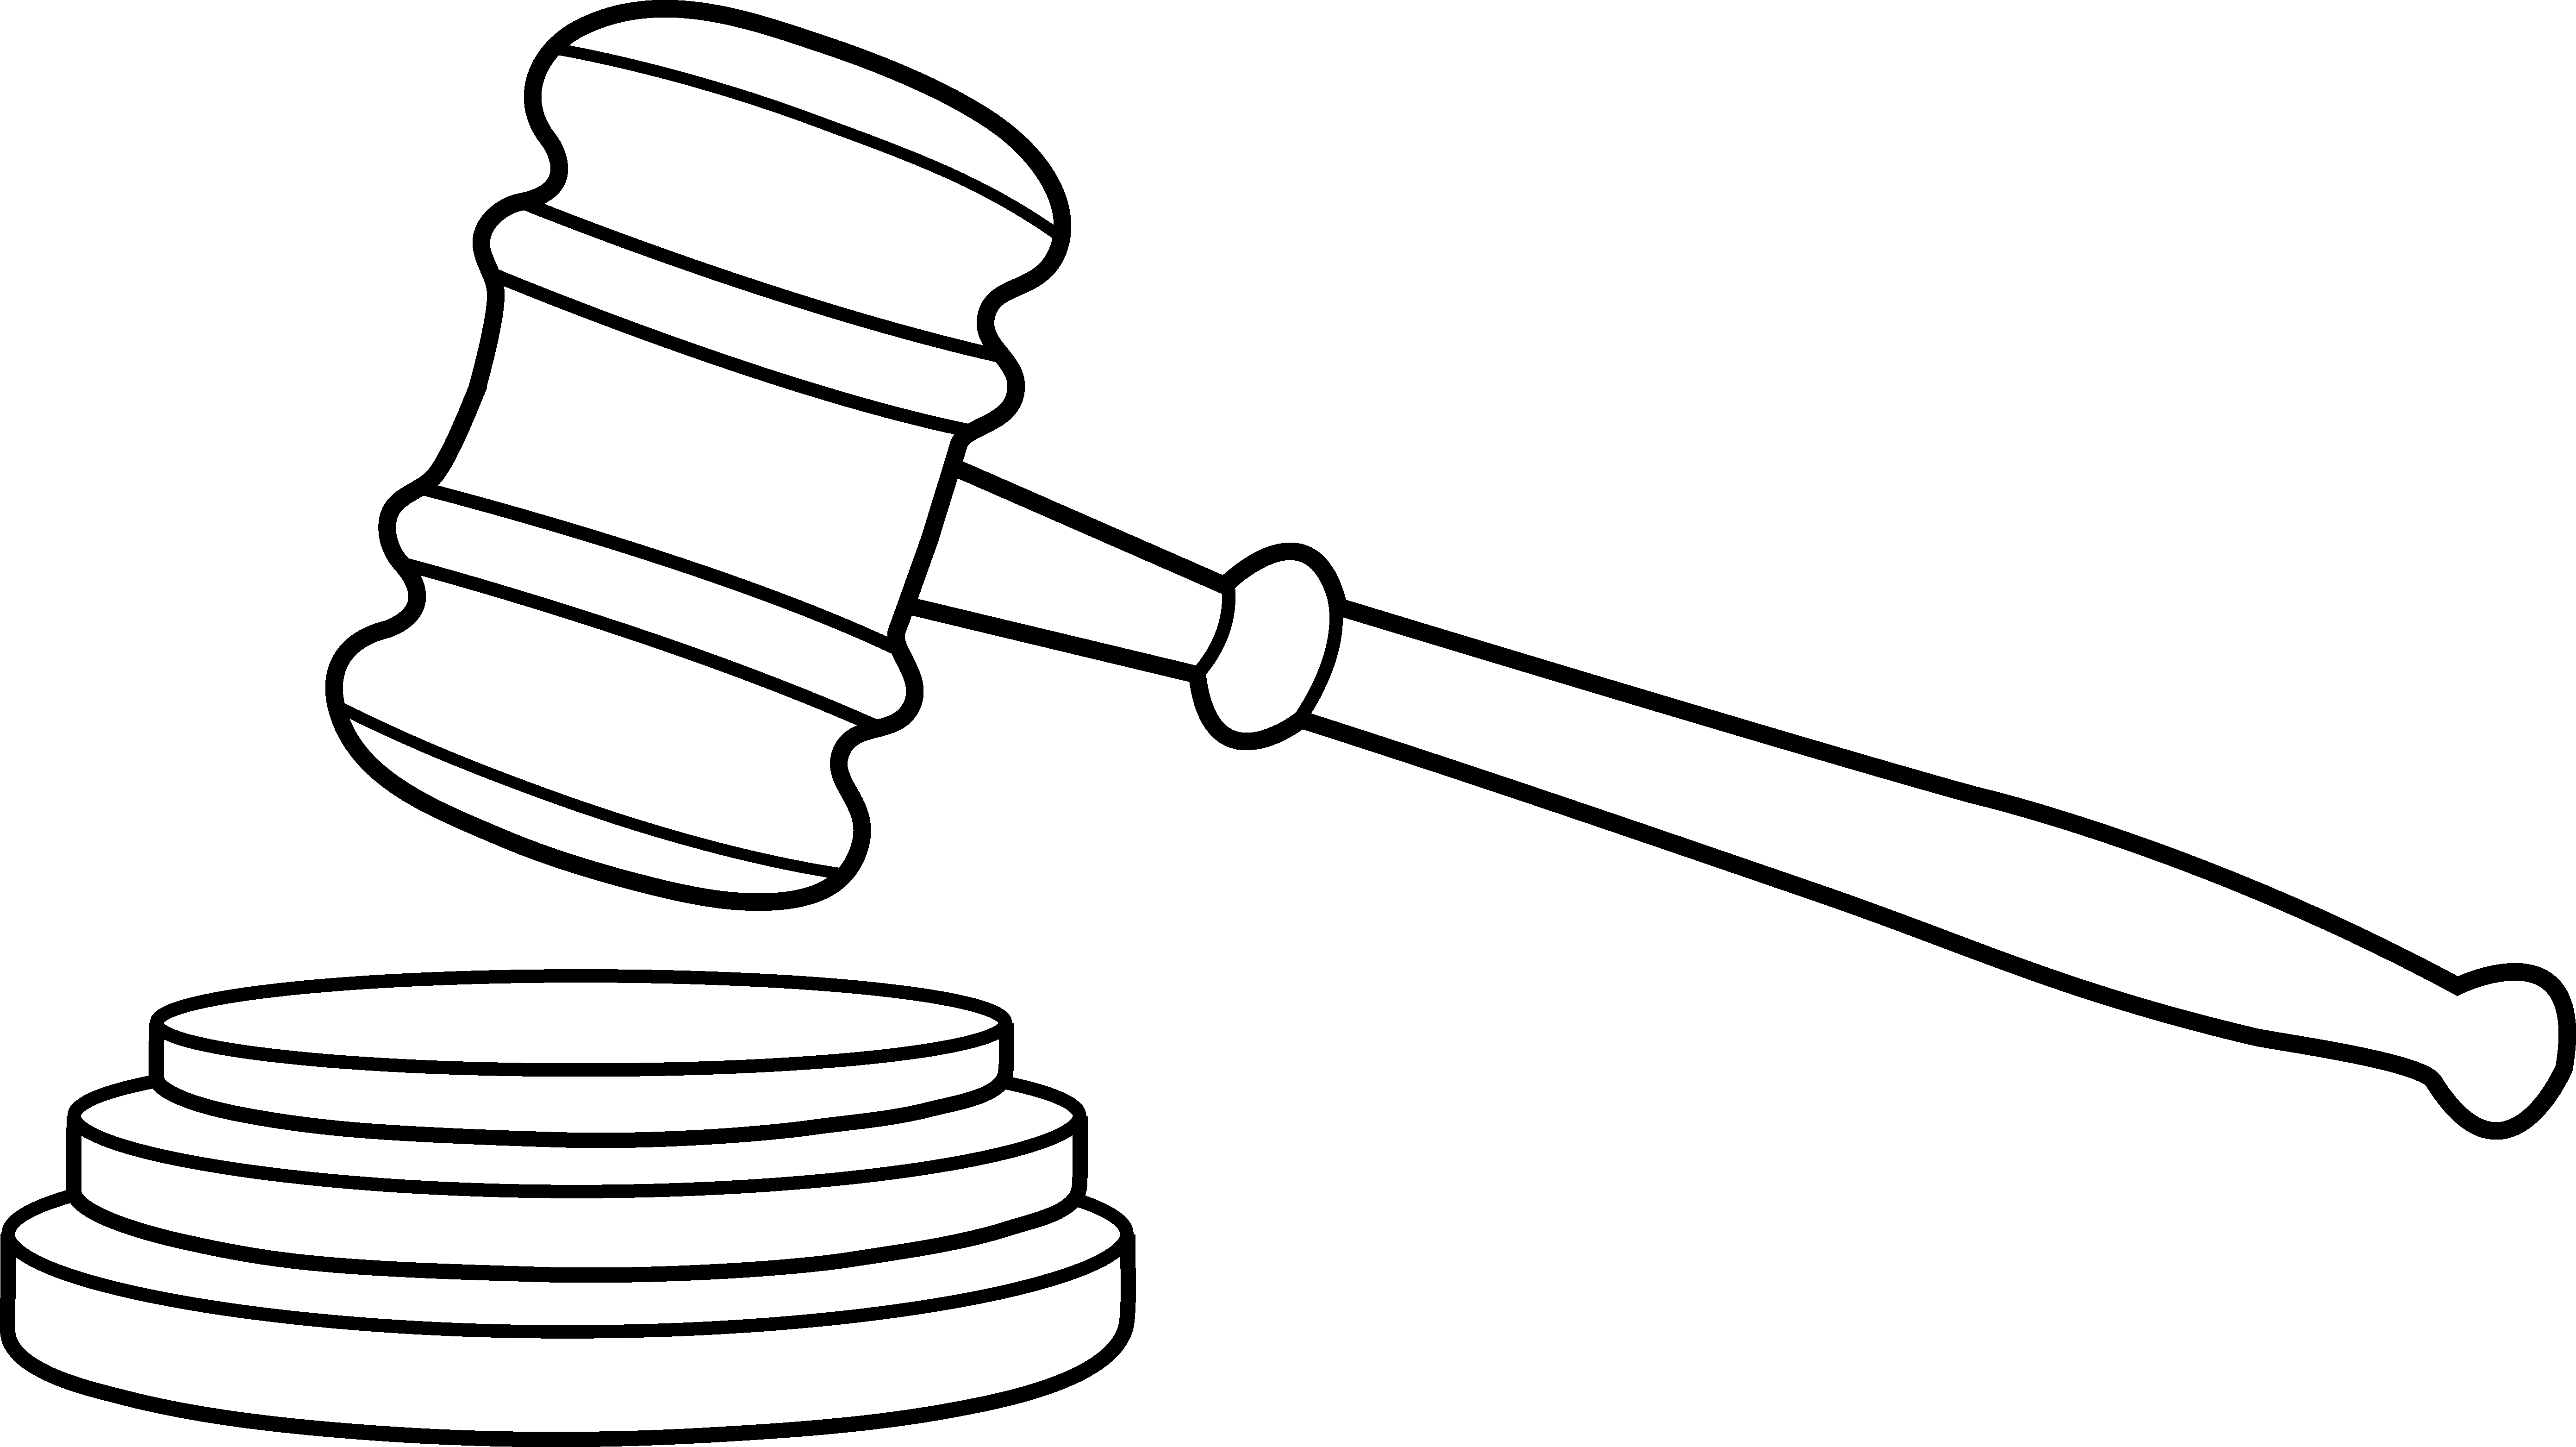 Free Gavel Cliparts, Download Free Clip Art, Free Clip Art